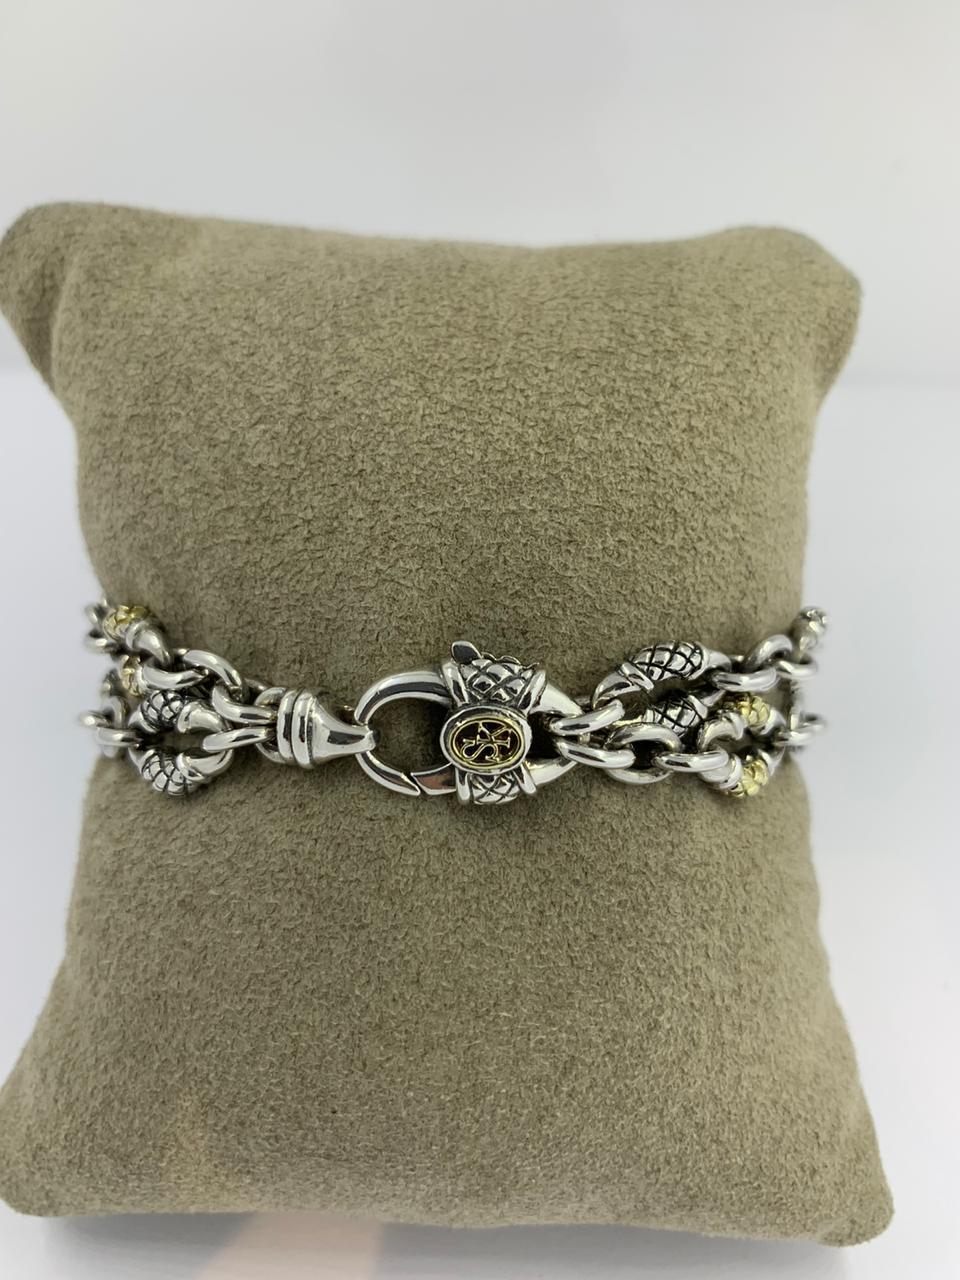 Scott Kay Silver and Gold Bracelet
2 row silver and 18Kt gold bracelet with stations
SKS-10253
